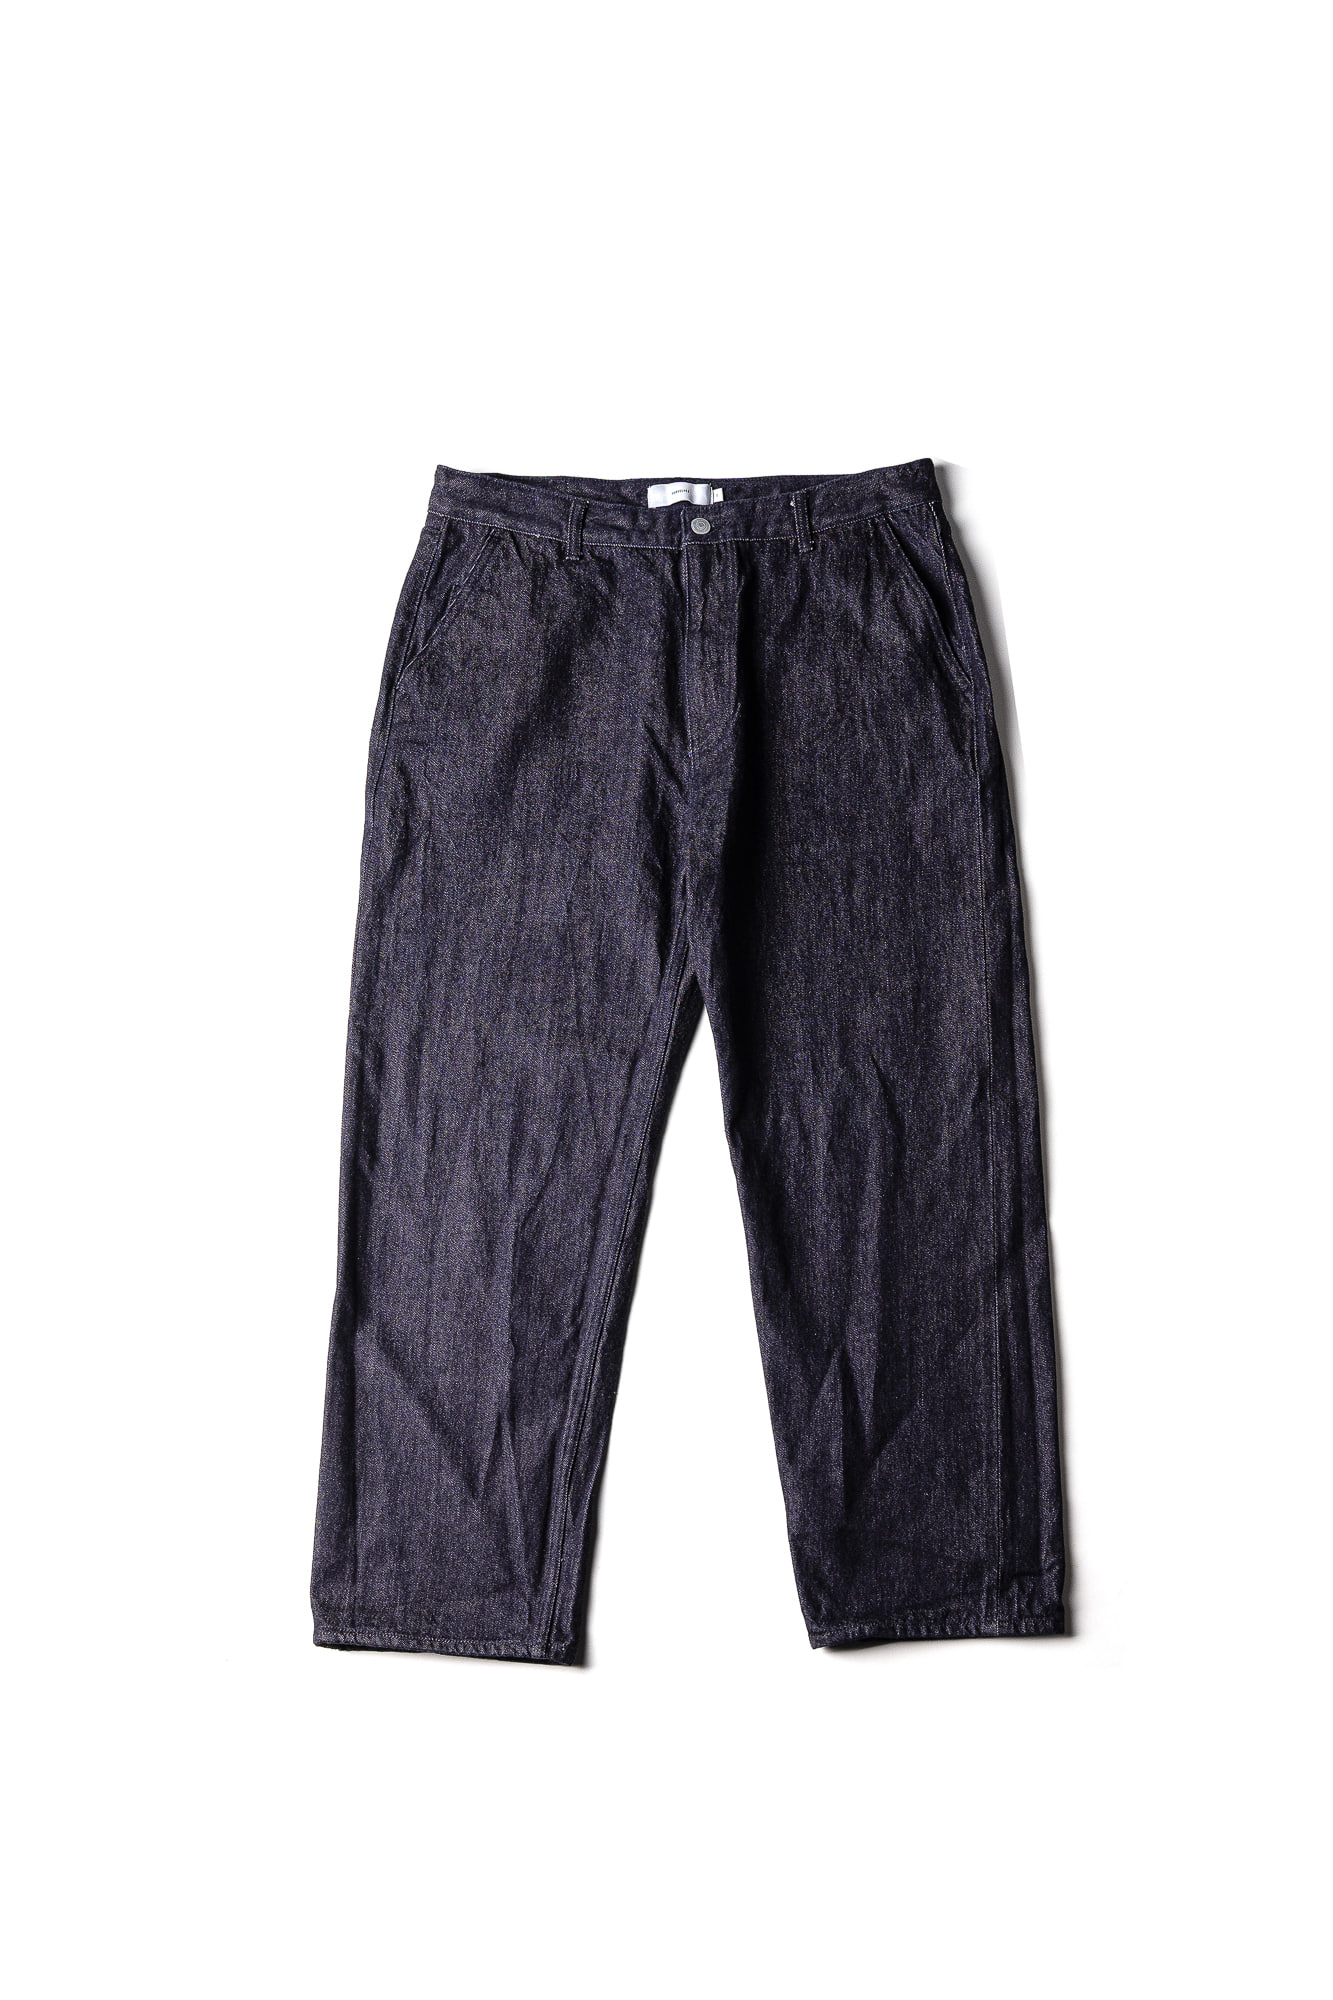 [RESTOCK] ORGANIC COTTON RELAXED DENIM PANTS (one-wash)